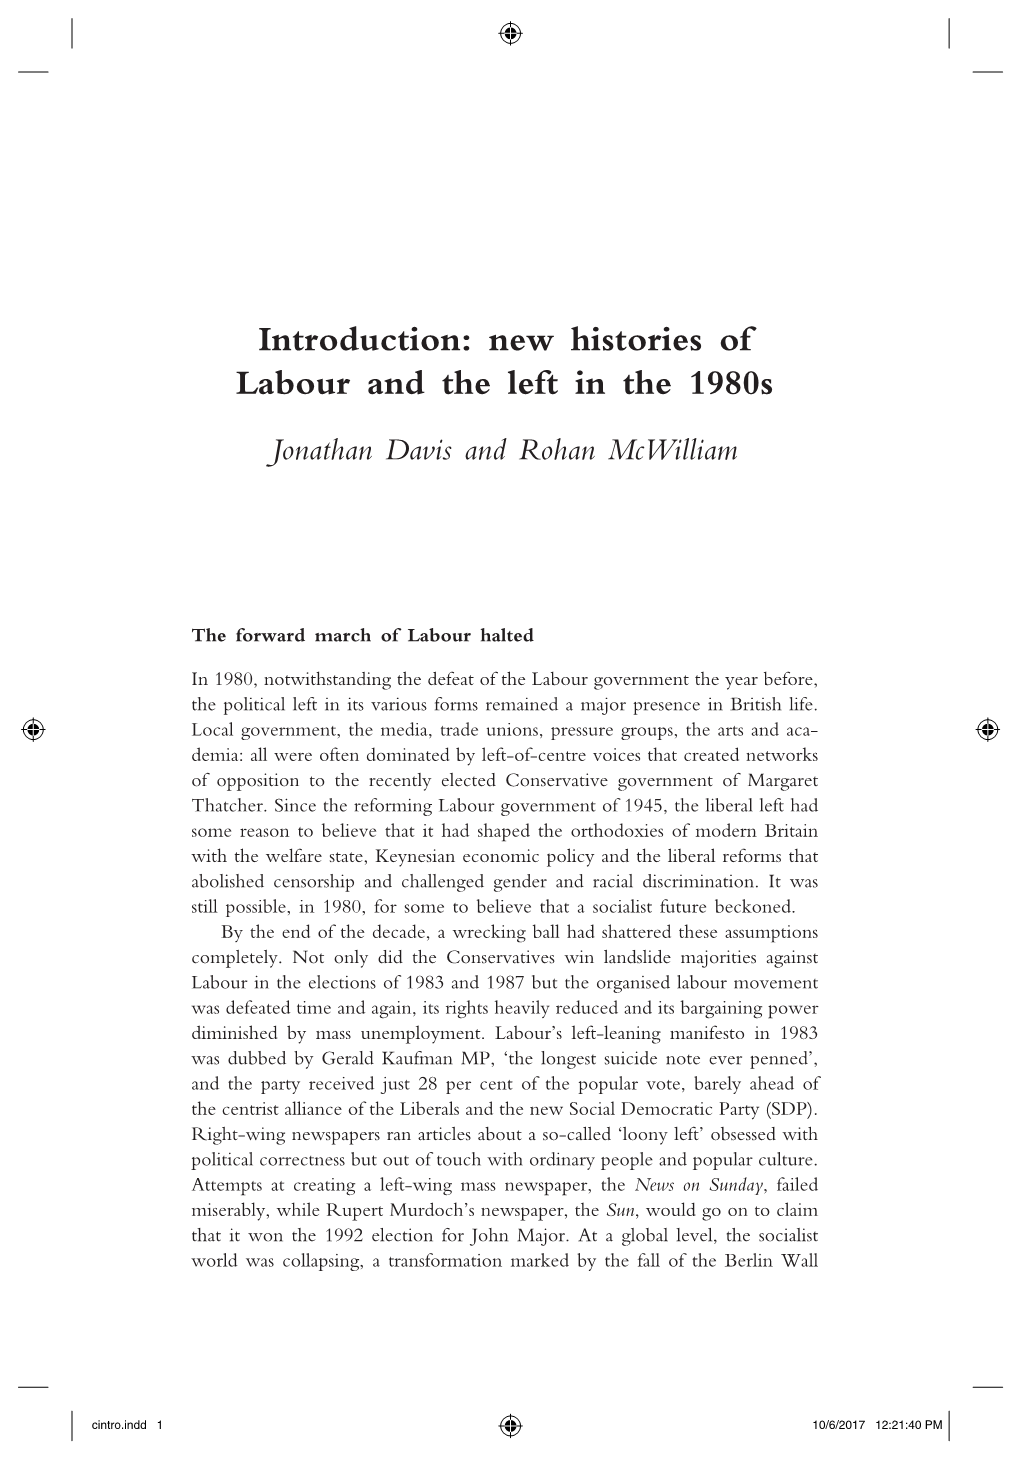 New Histories of Labour and the Left in the 1980S